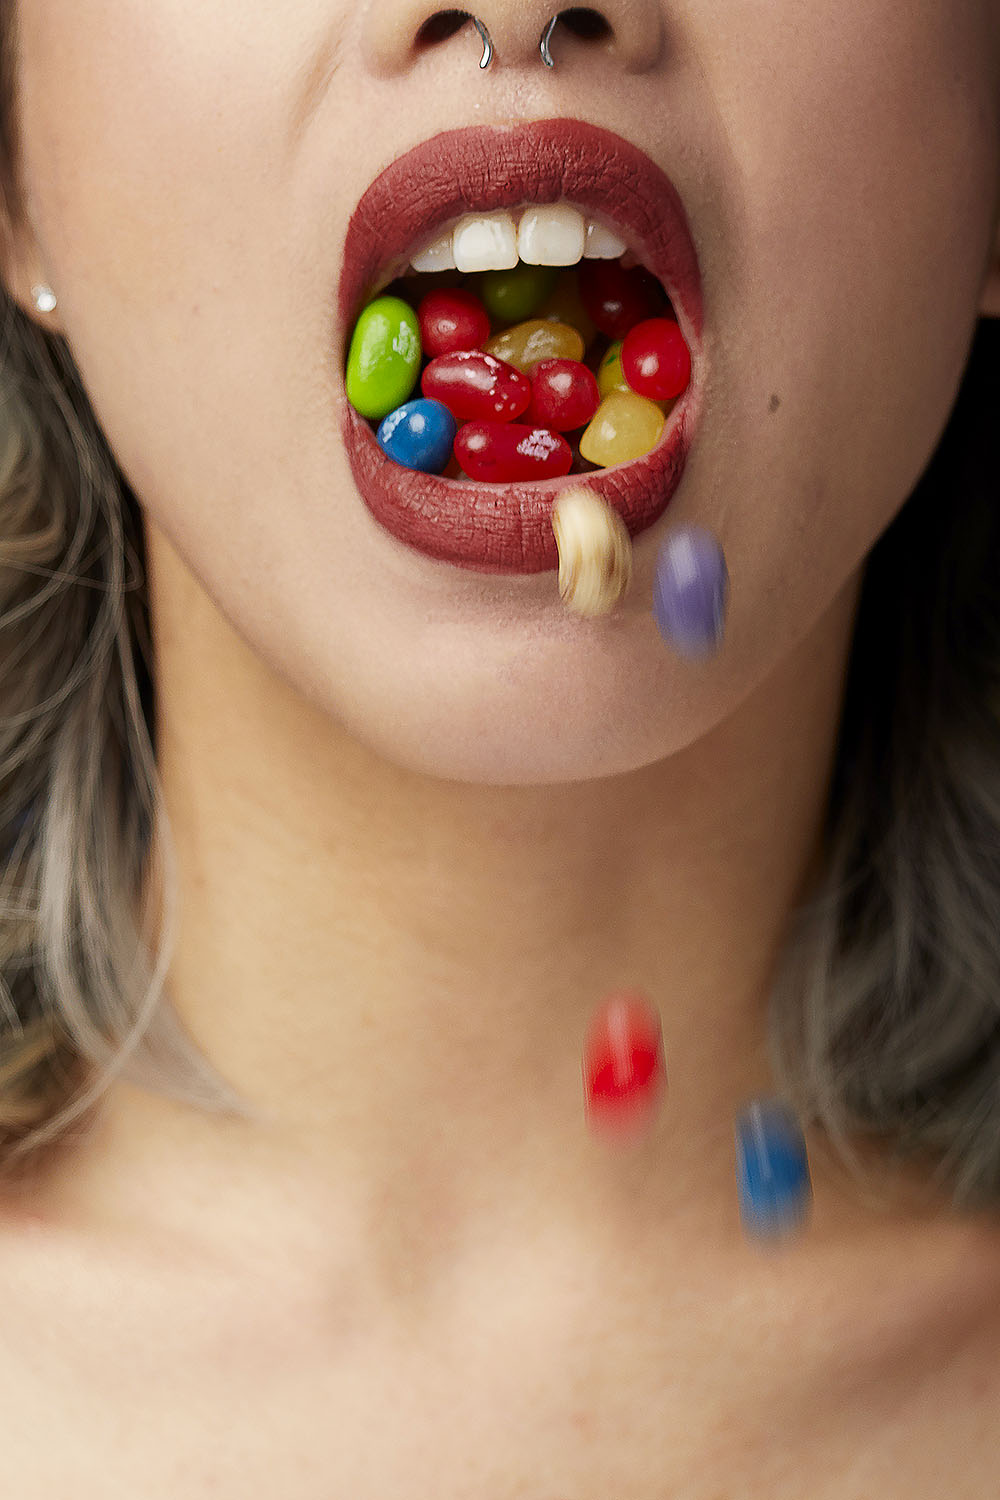 girl with red lipstick and jelly bean candy spilling out of her mouth